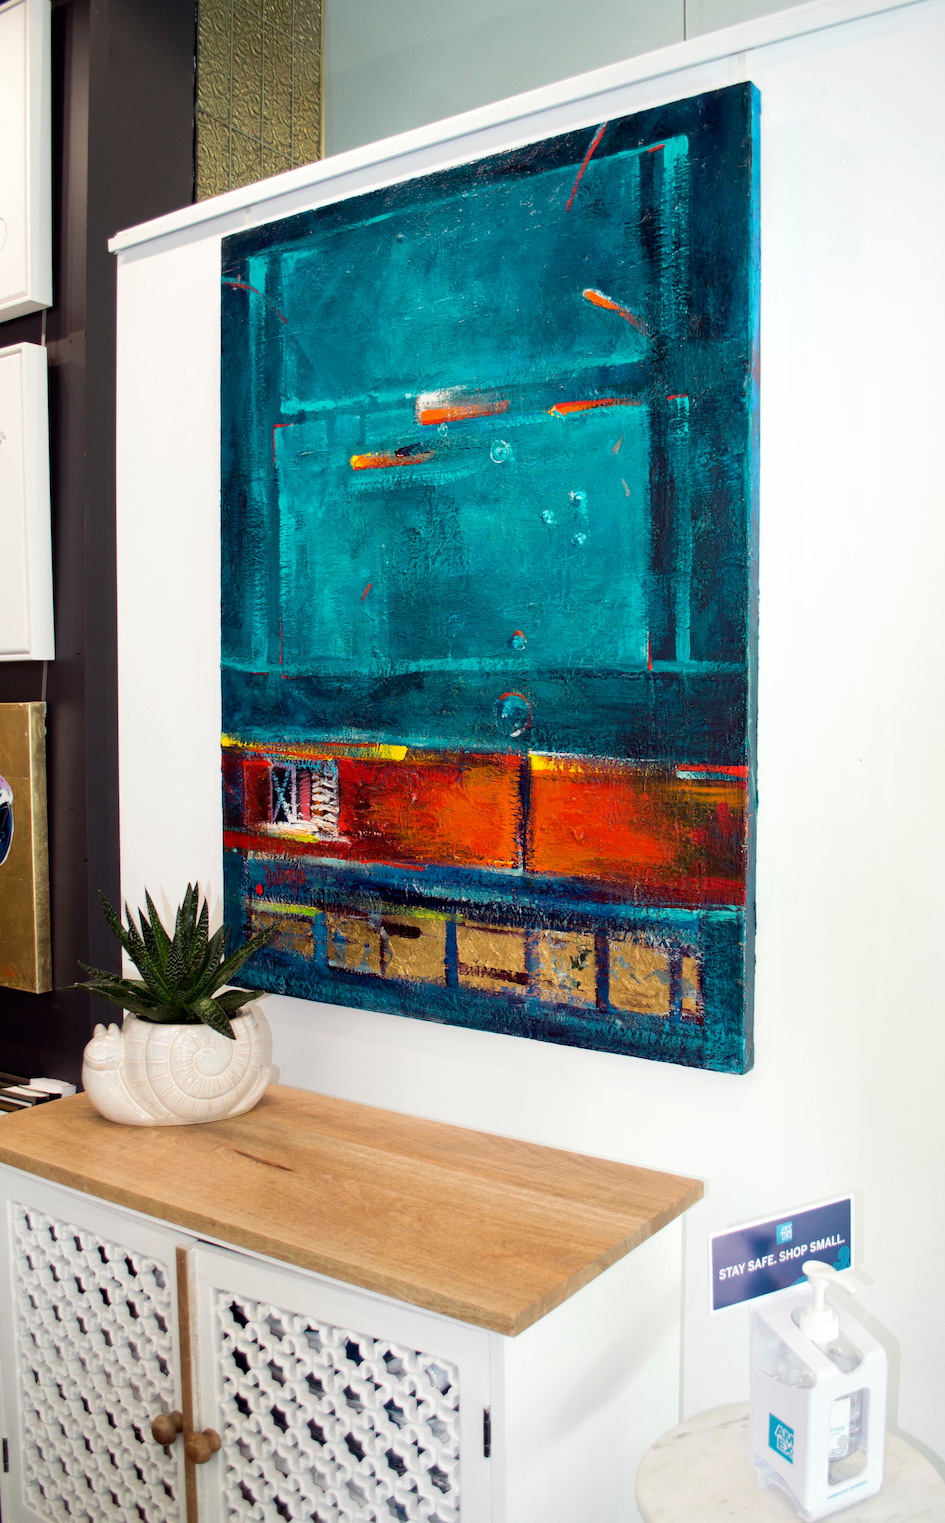 Wall Design Ideas 2 With Abstract Painting "Turquoise Aqua" By Lucette Dalozzo